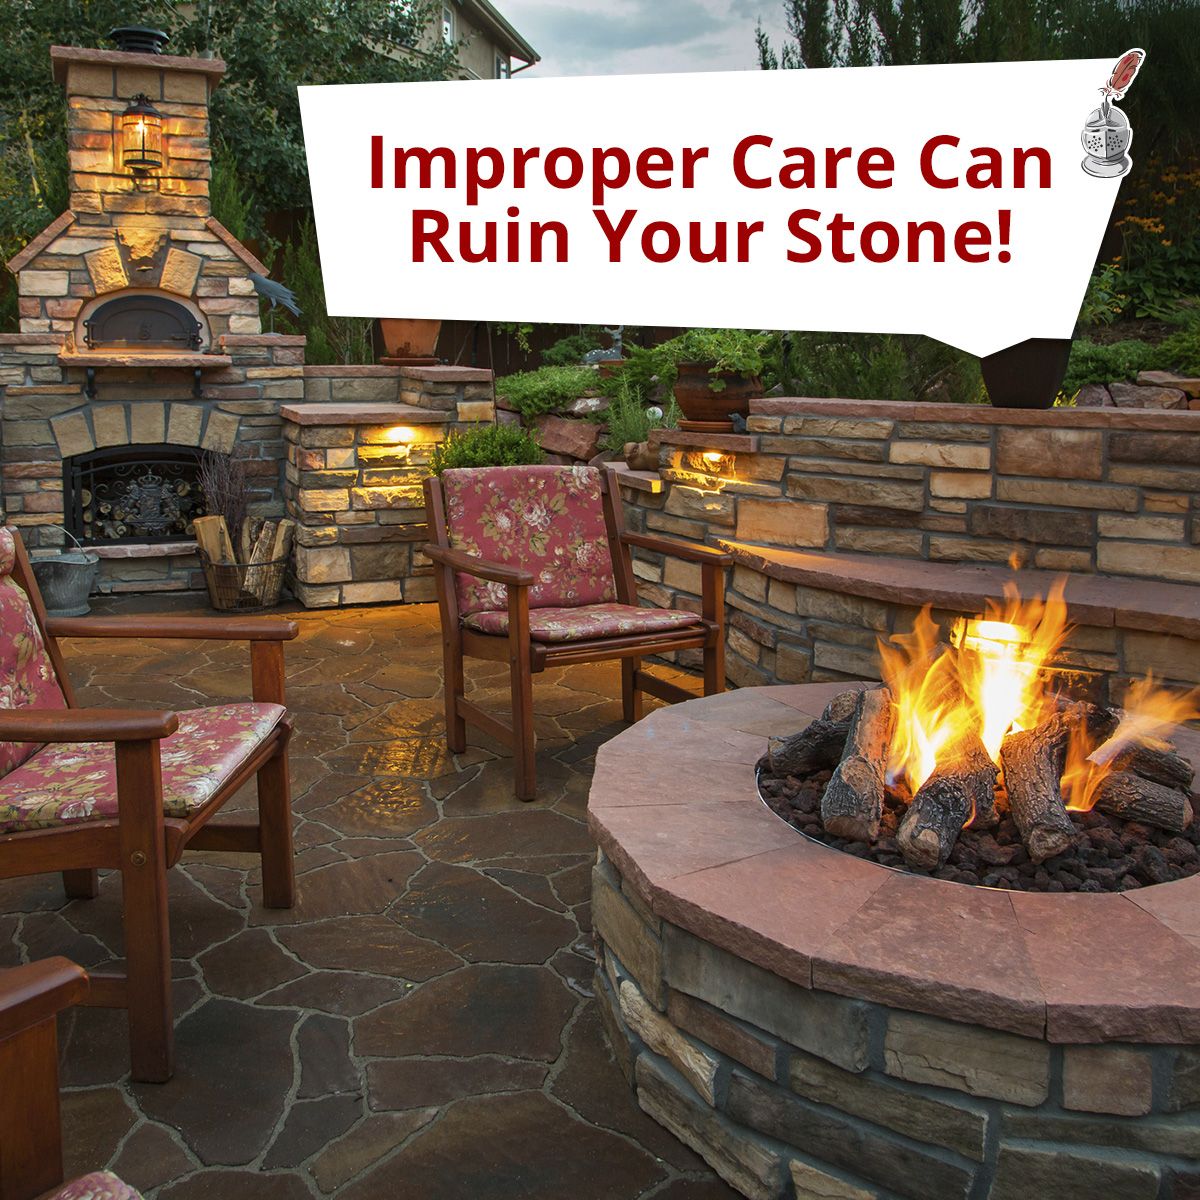 Improper Care Can Ruin Your Stone!